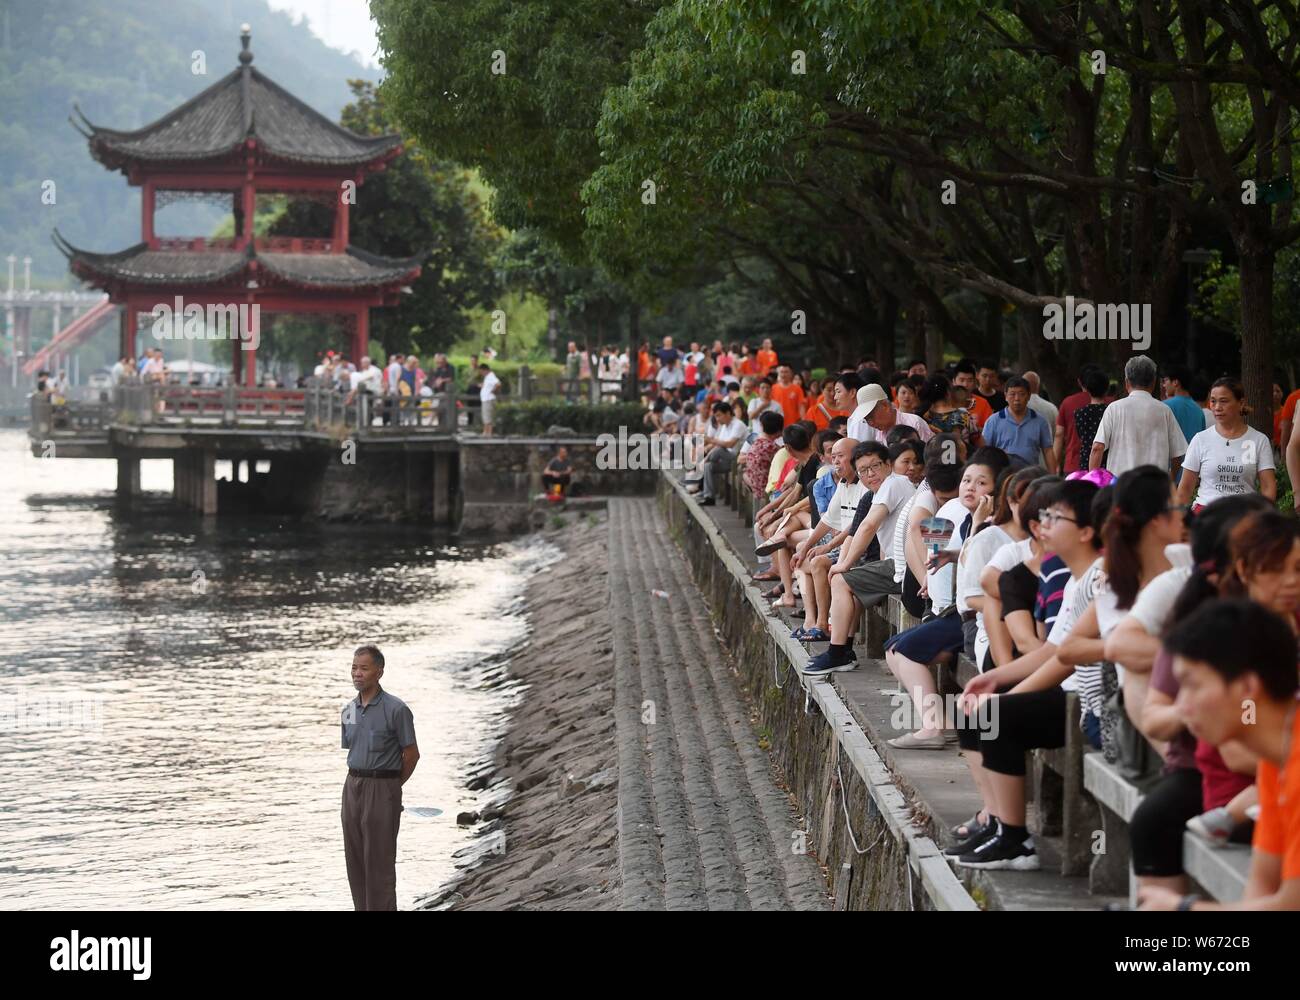 Tourists sit along the Xinanjiang River, where the water temperature remains at around 17 degrees Celcius, at a scenic spot in Jiande city, Hangzhou c Stock Photo